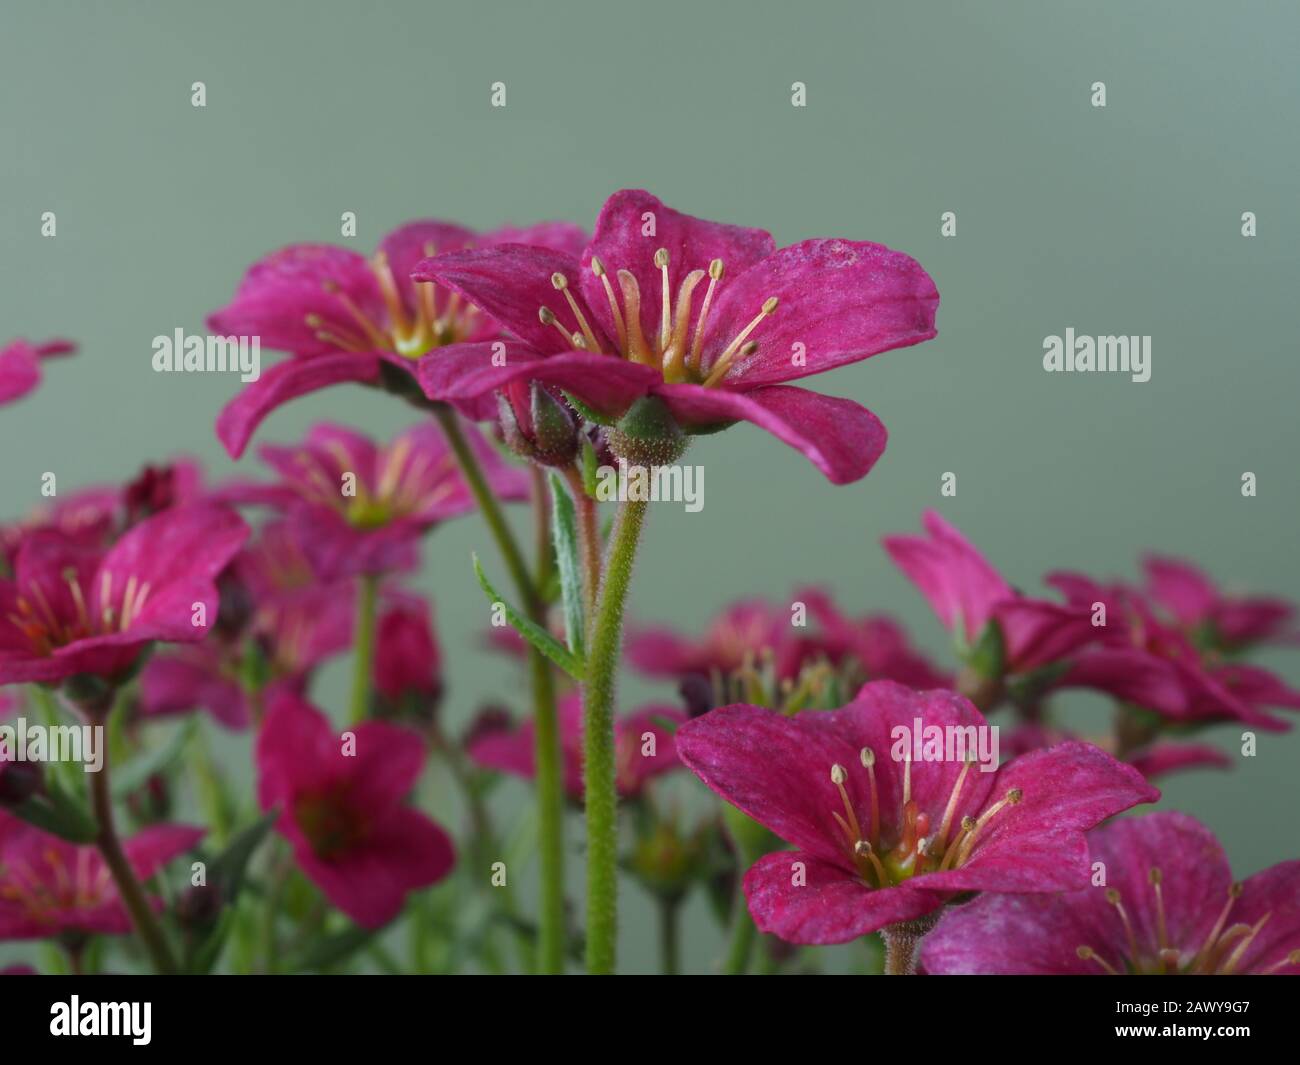 Closeup of pretty little Saxifrage flowers, variety Alpino Pink Early, against a plain background Stock Photo